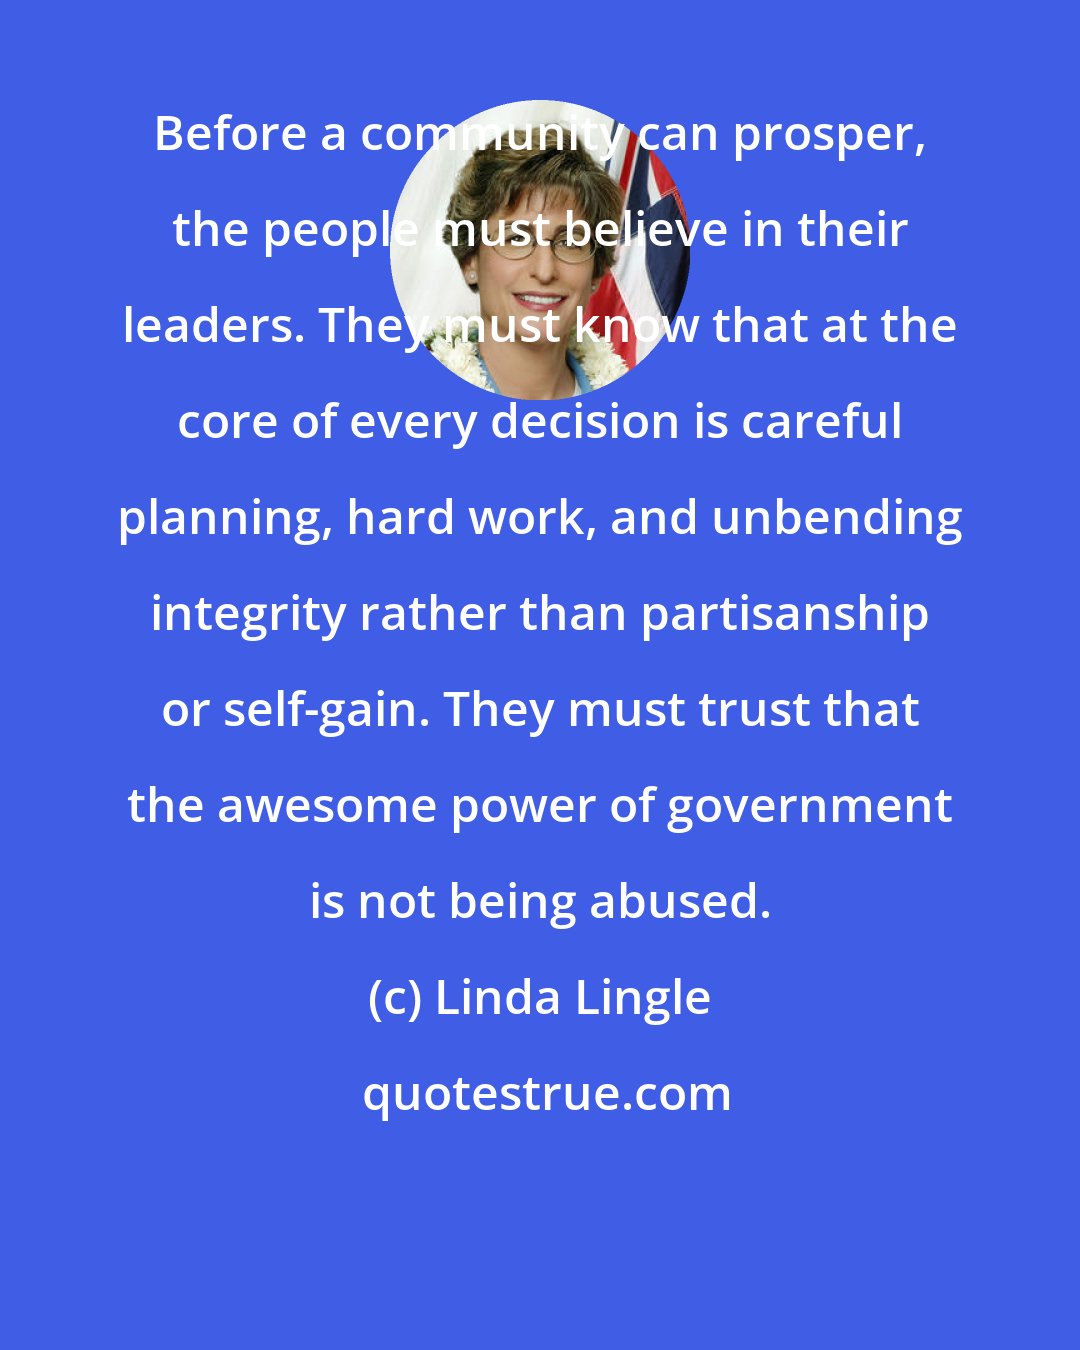 Linda Lingle: Before a community can prosper, the people must believe in their leaders. They must know that at the core of every decision is careful planning, hard work, and unbending integrity rather than partisanship or self-gain. They must trust that the awesome power of government is not being abused.